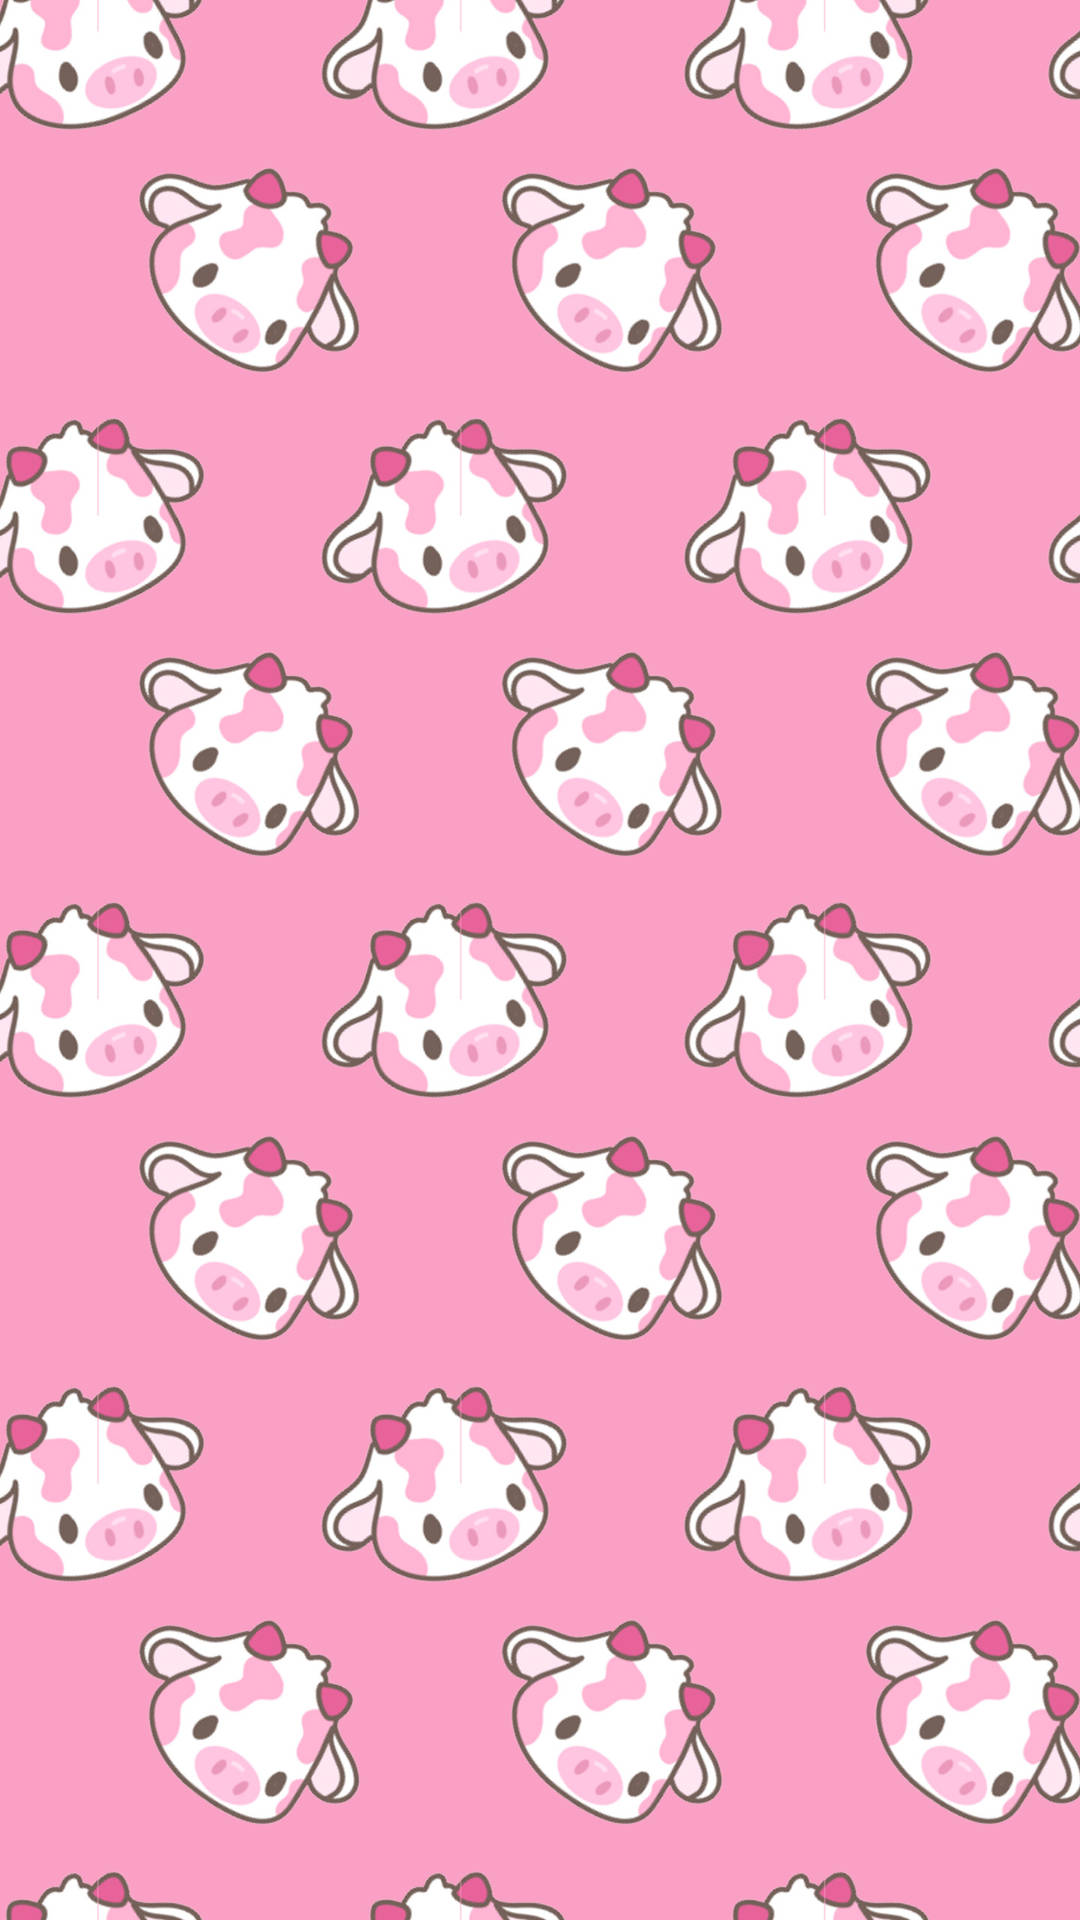 Download Strawberry Cow With Horns Tiled Wallpaper | Wallpapers.com